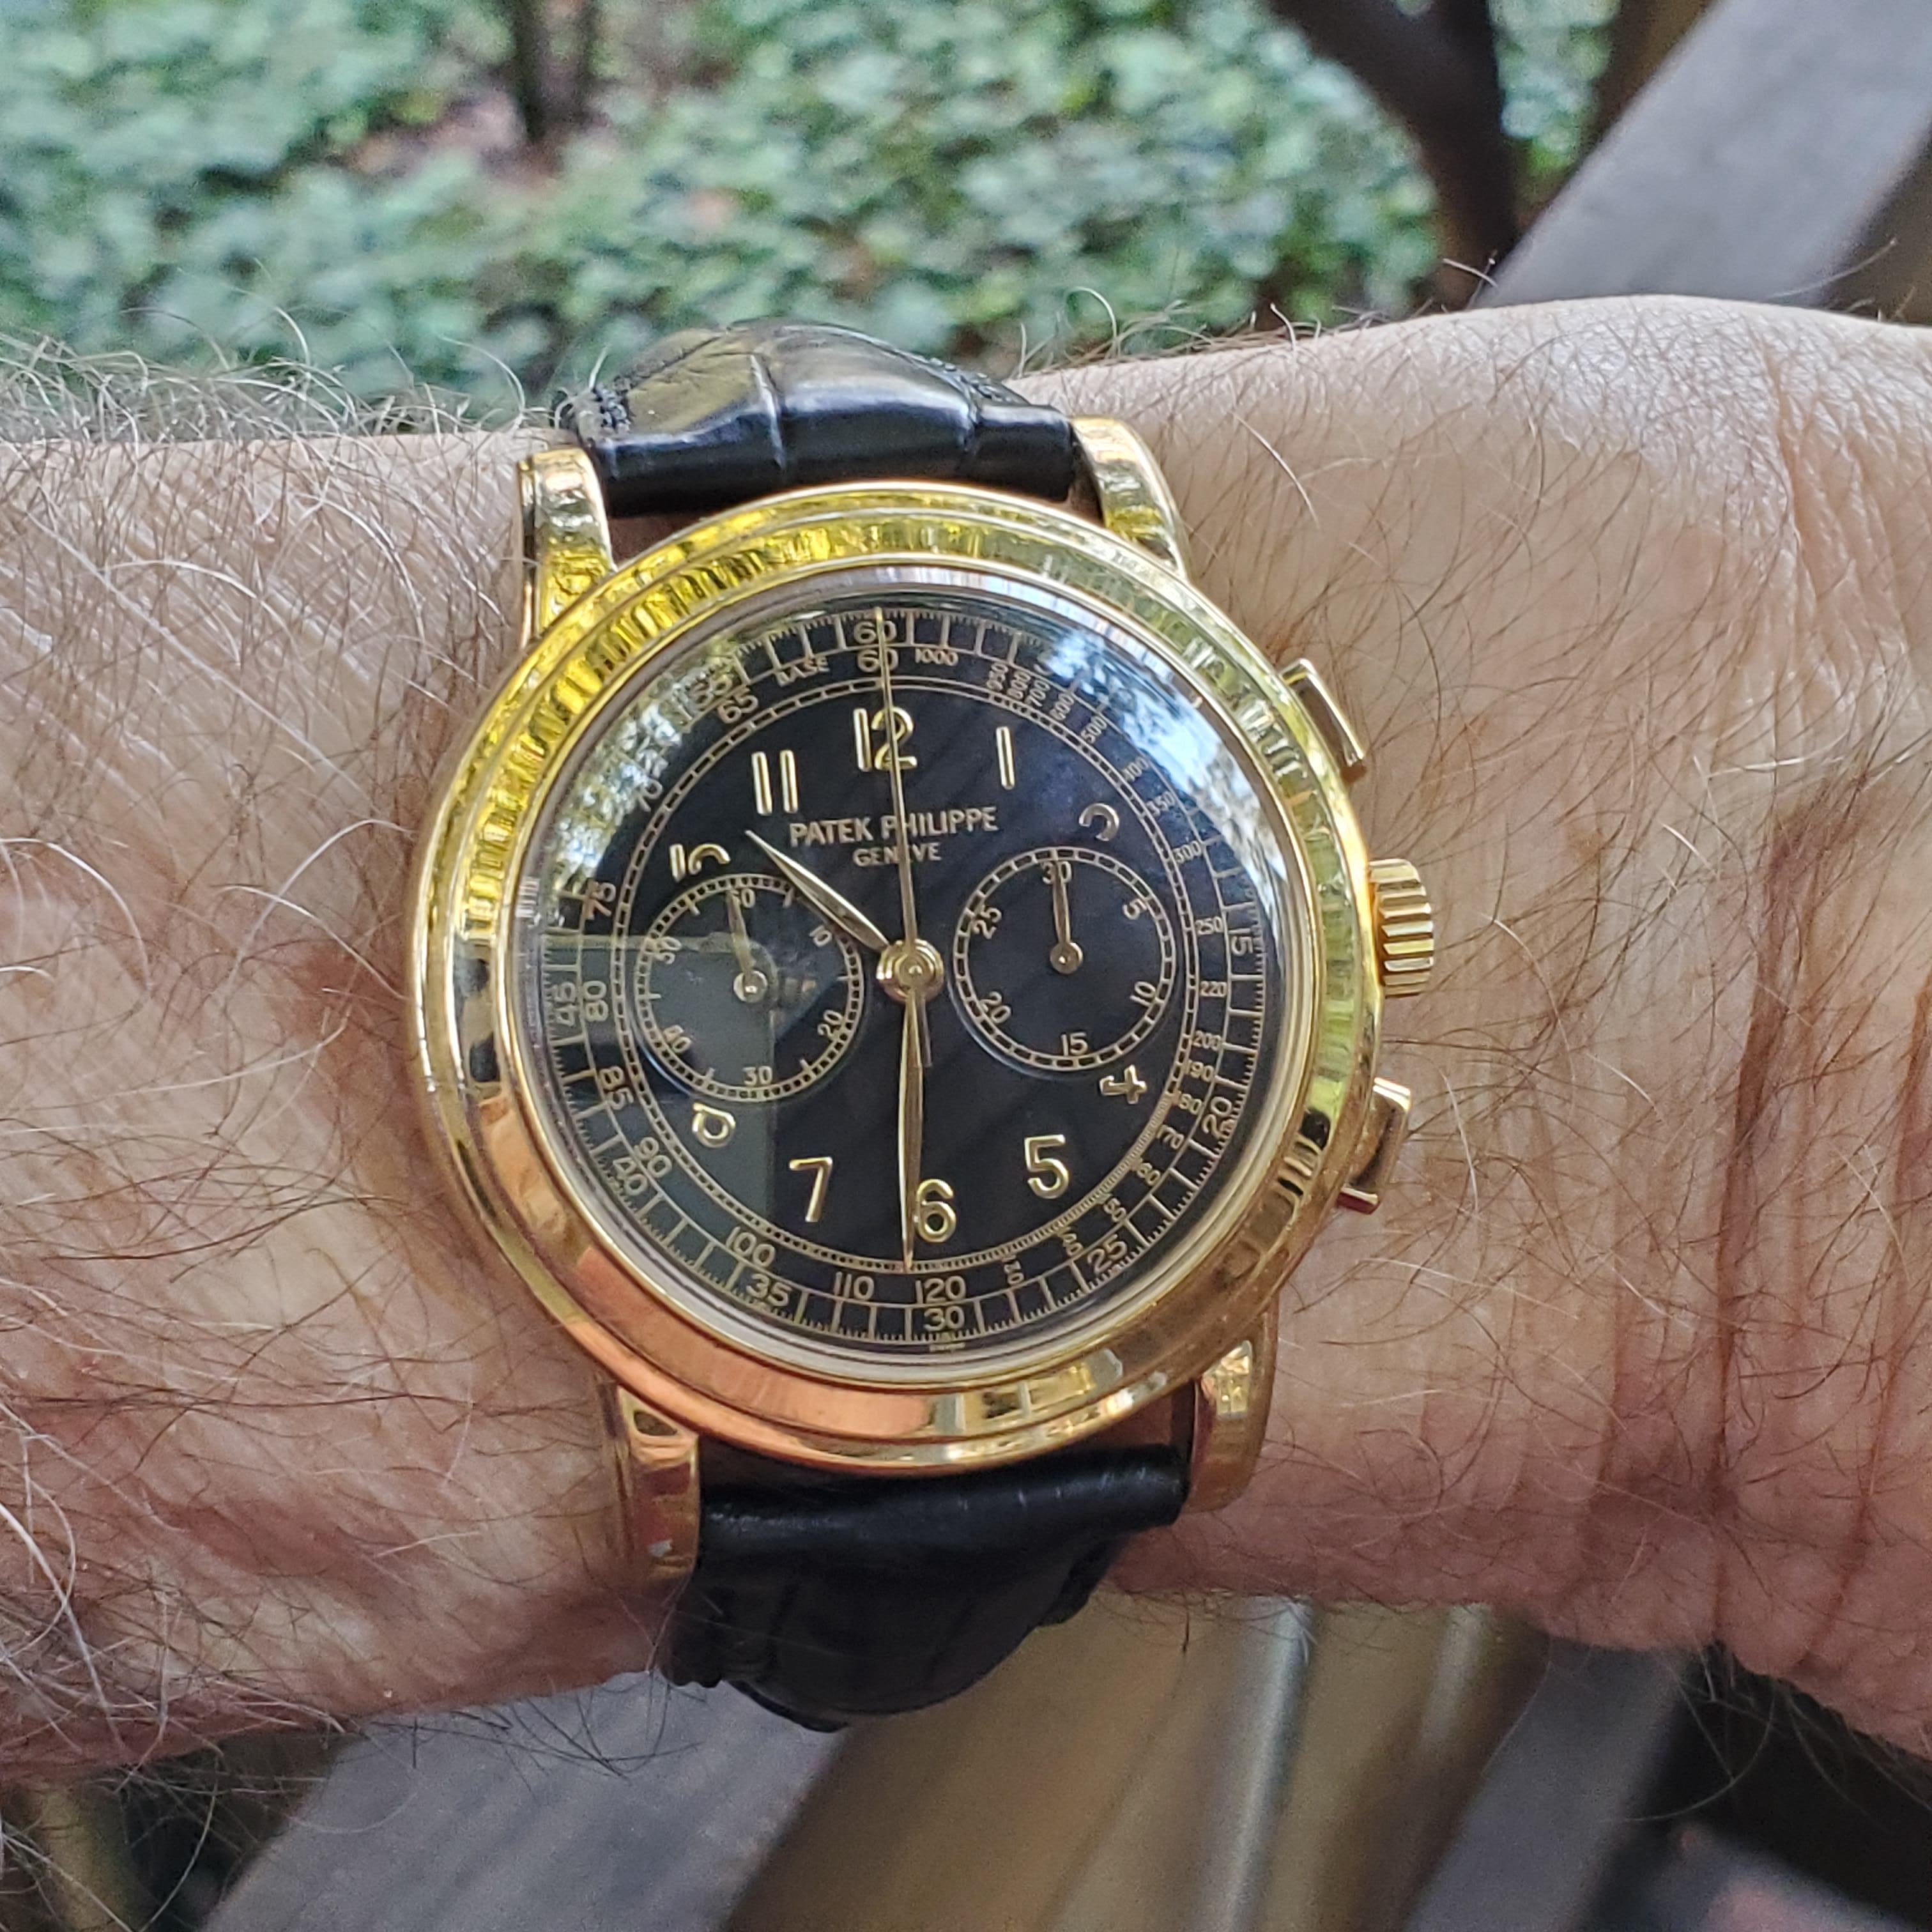 Patek Philippe Ref# 5070J-001  This example is in excellent condition with very crisp hallmarks.

The 5070J chronograph manual-wind watch, features a 42 mm case. This is a Yellow gold example with Black dial and yellow gold deployment buckle.